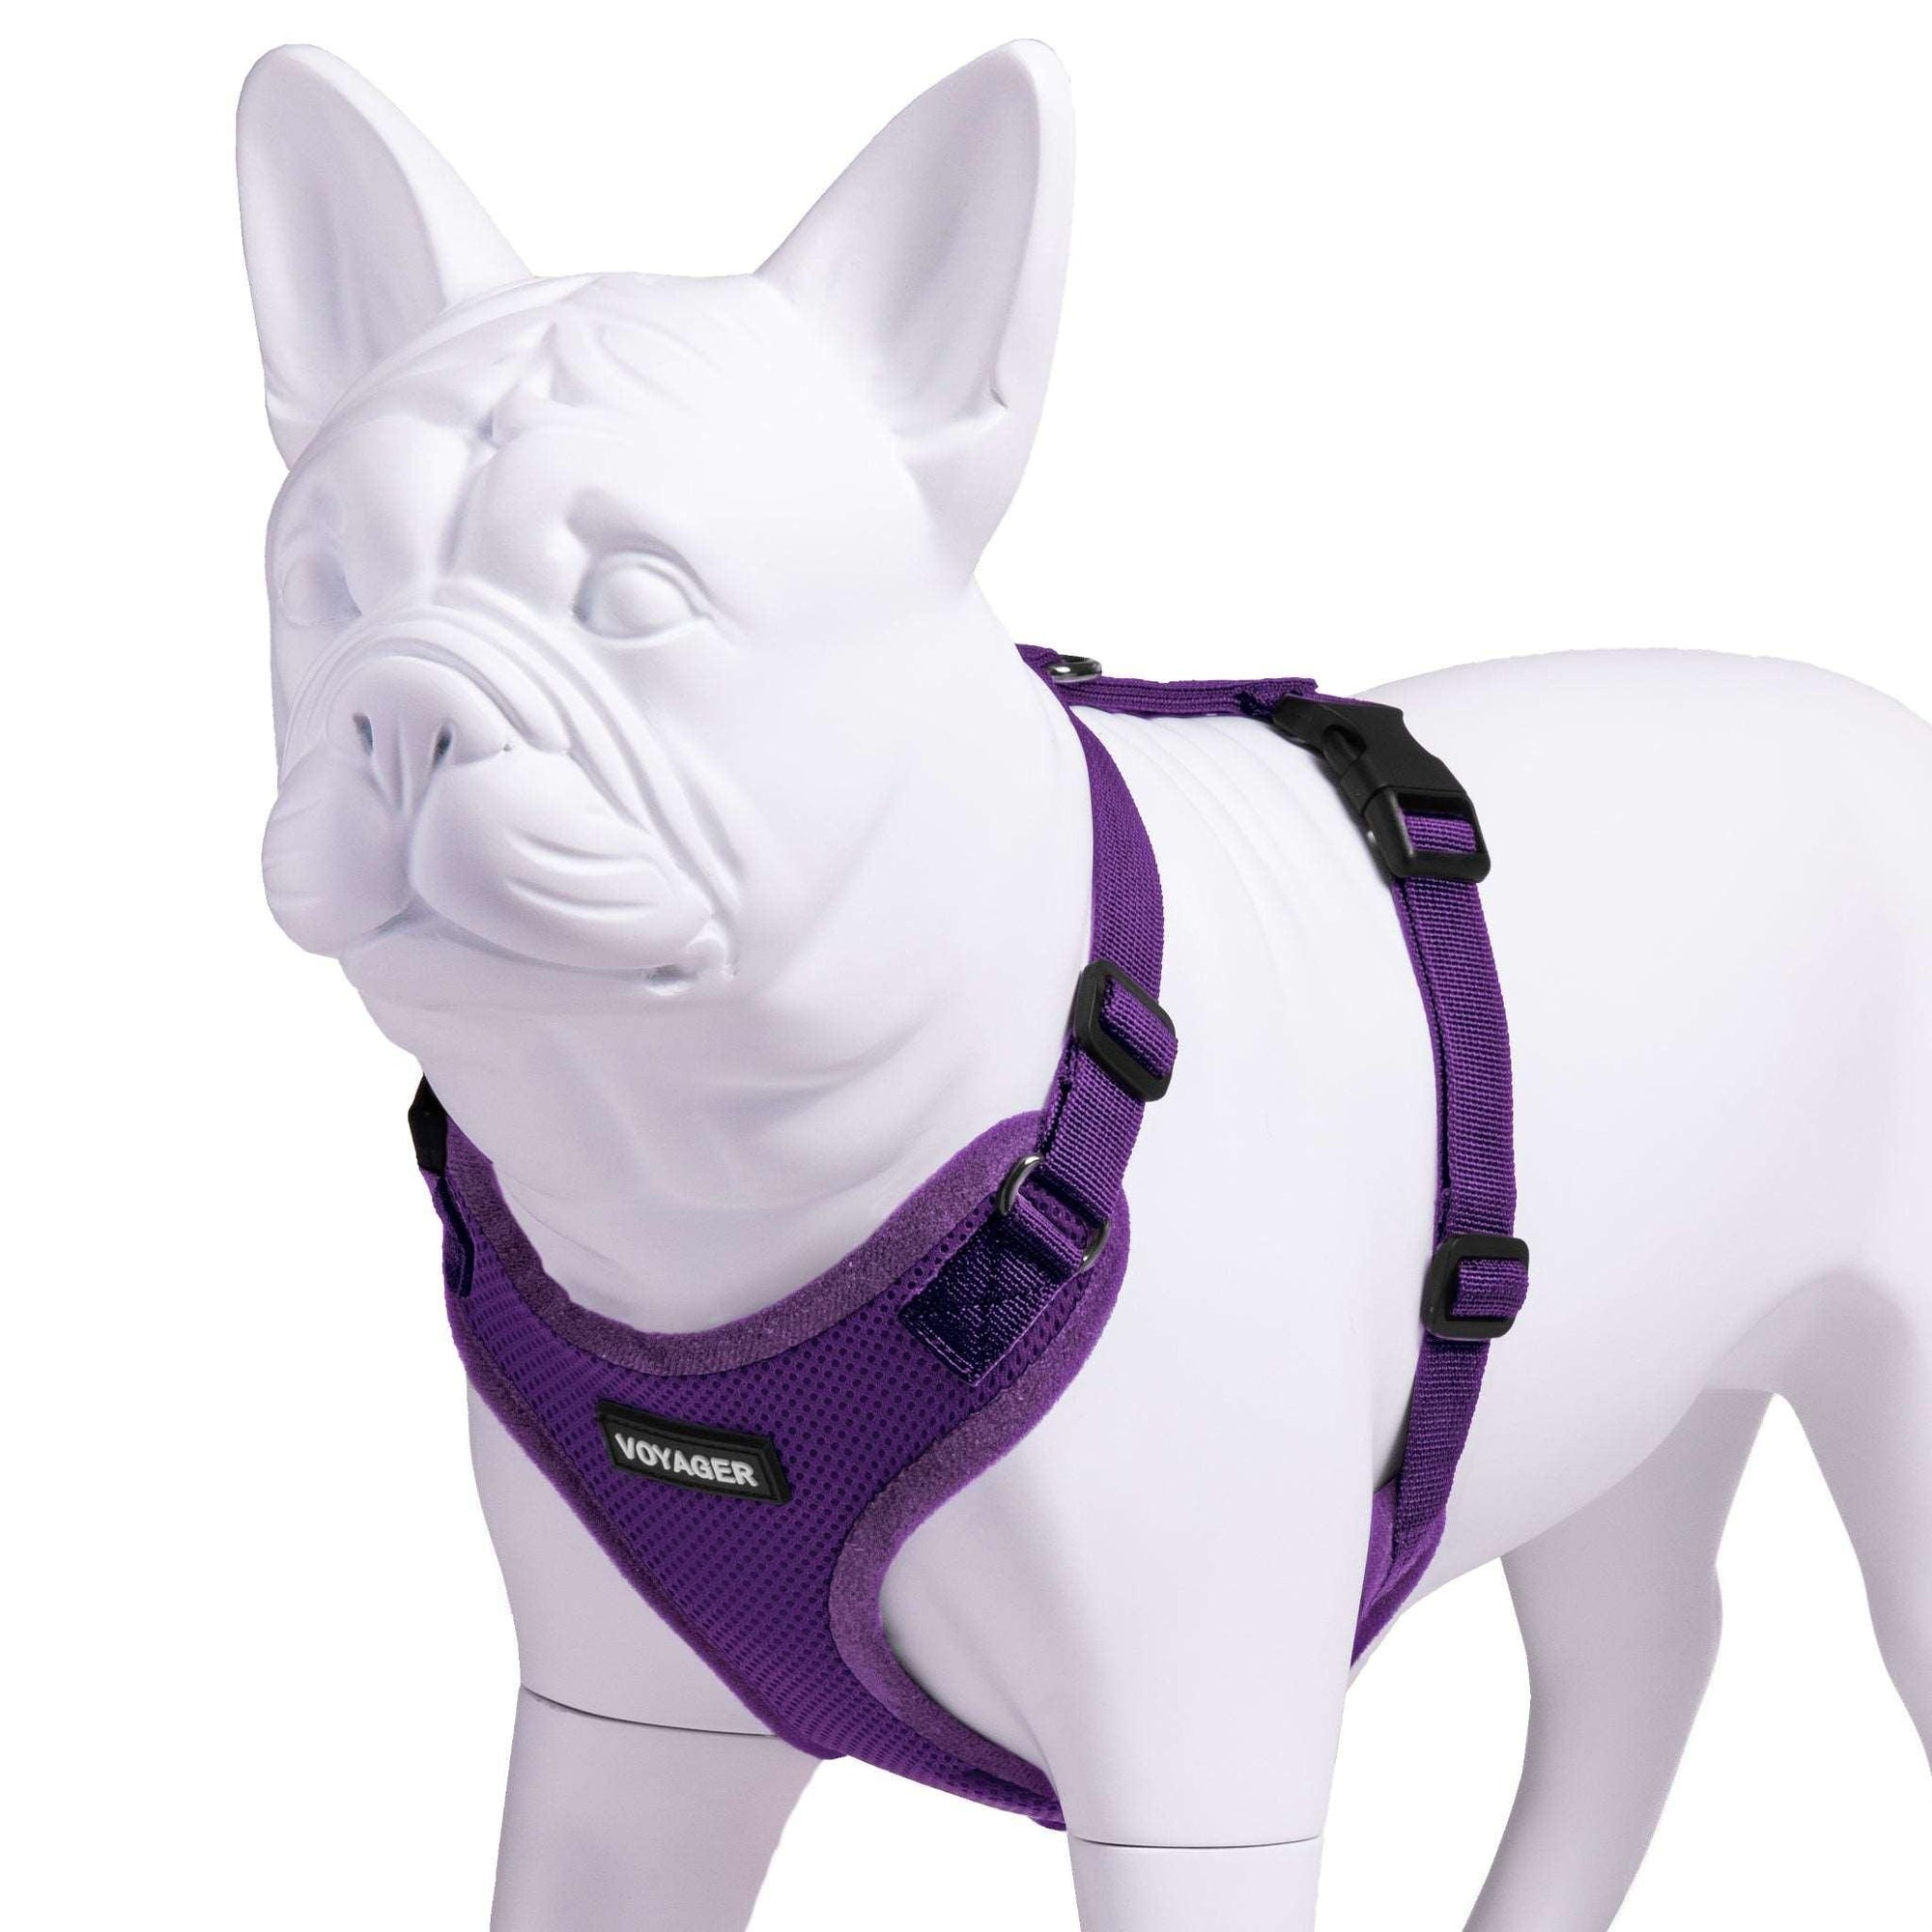 VOYAGER Step-In Lock Dog Harness in Purple with Matching Trim and Webbing - Expanded